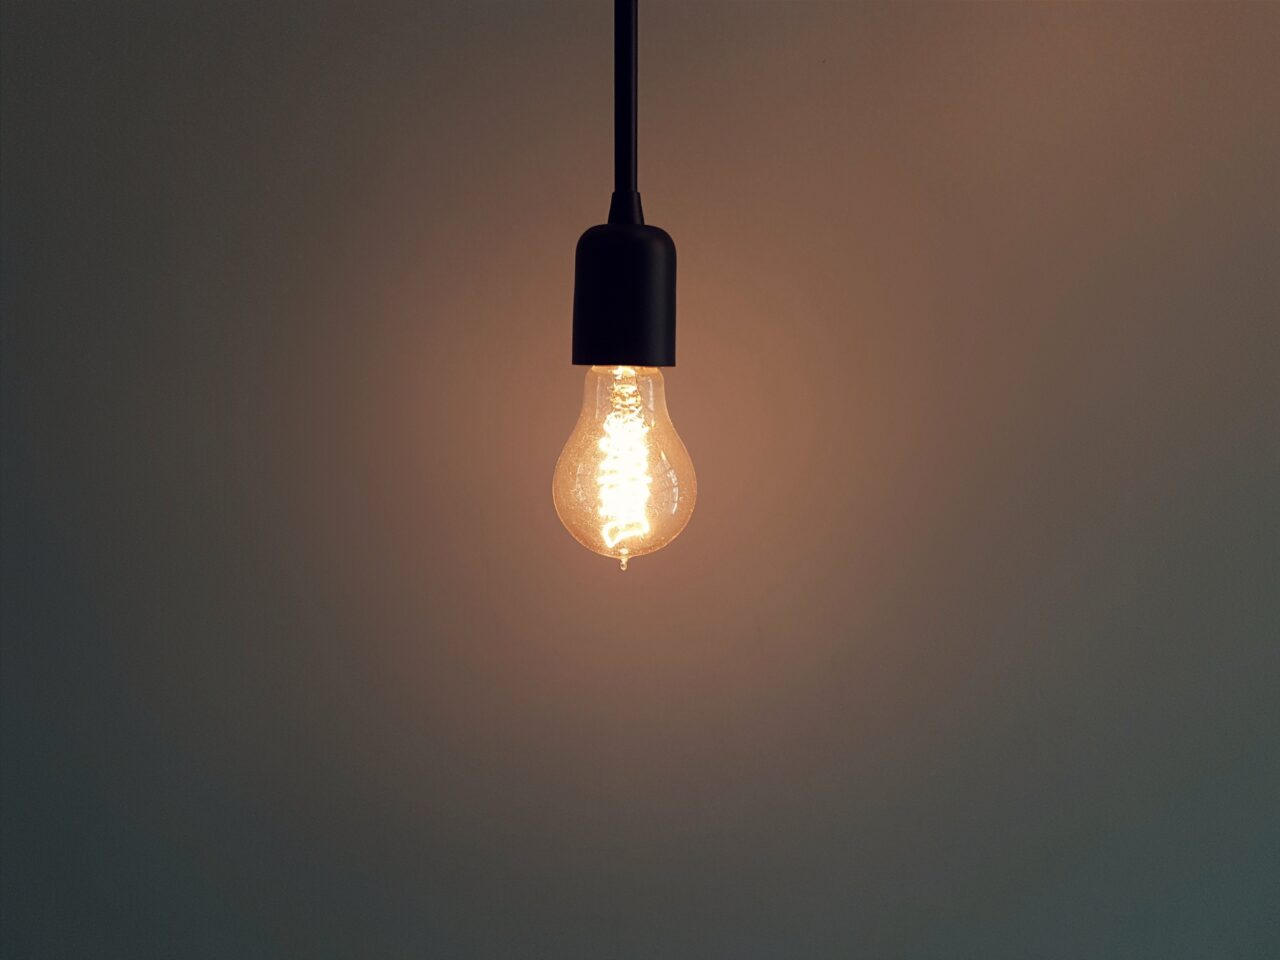 A lightbulb glowing in the dark represents innovation in turbulent times.